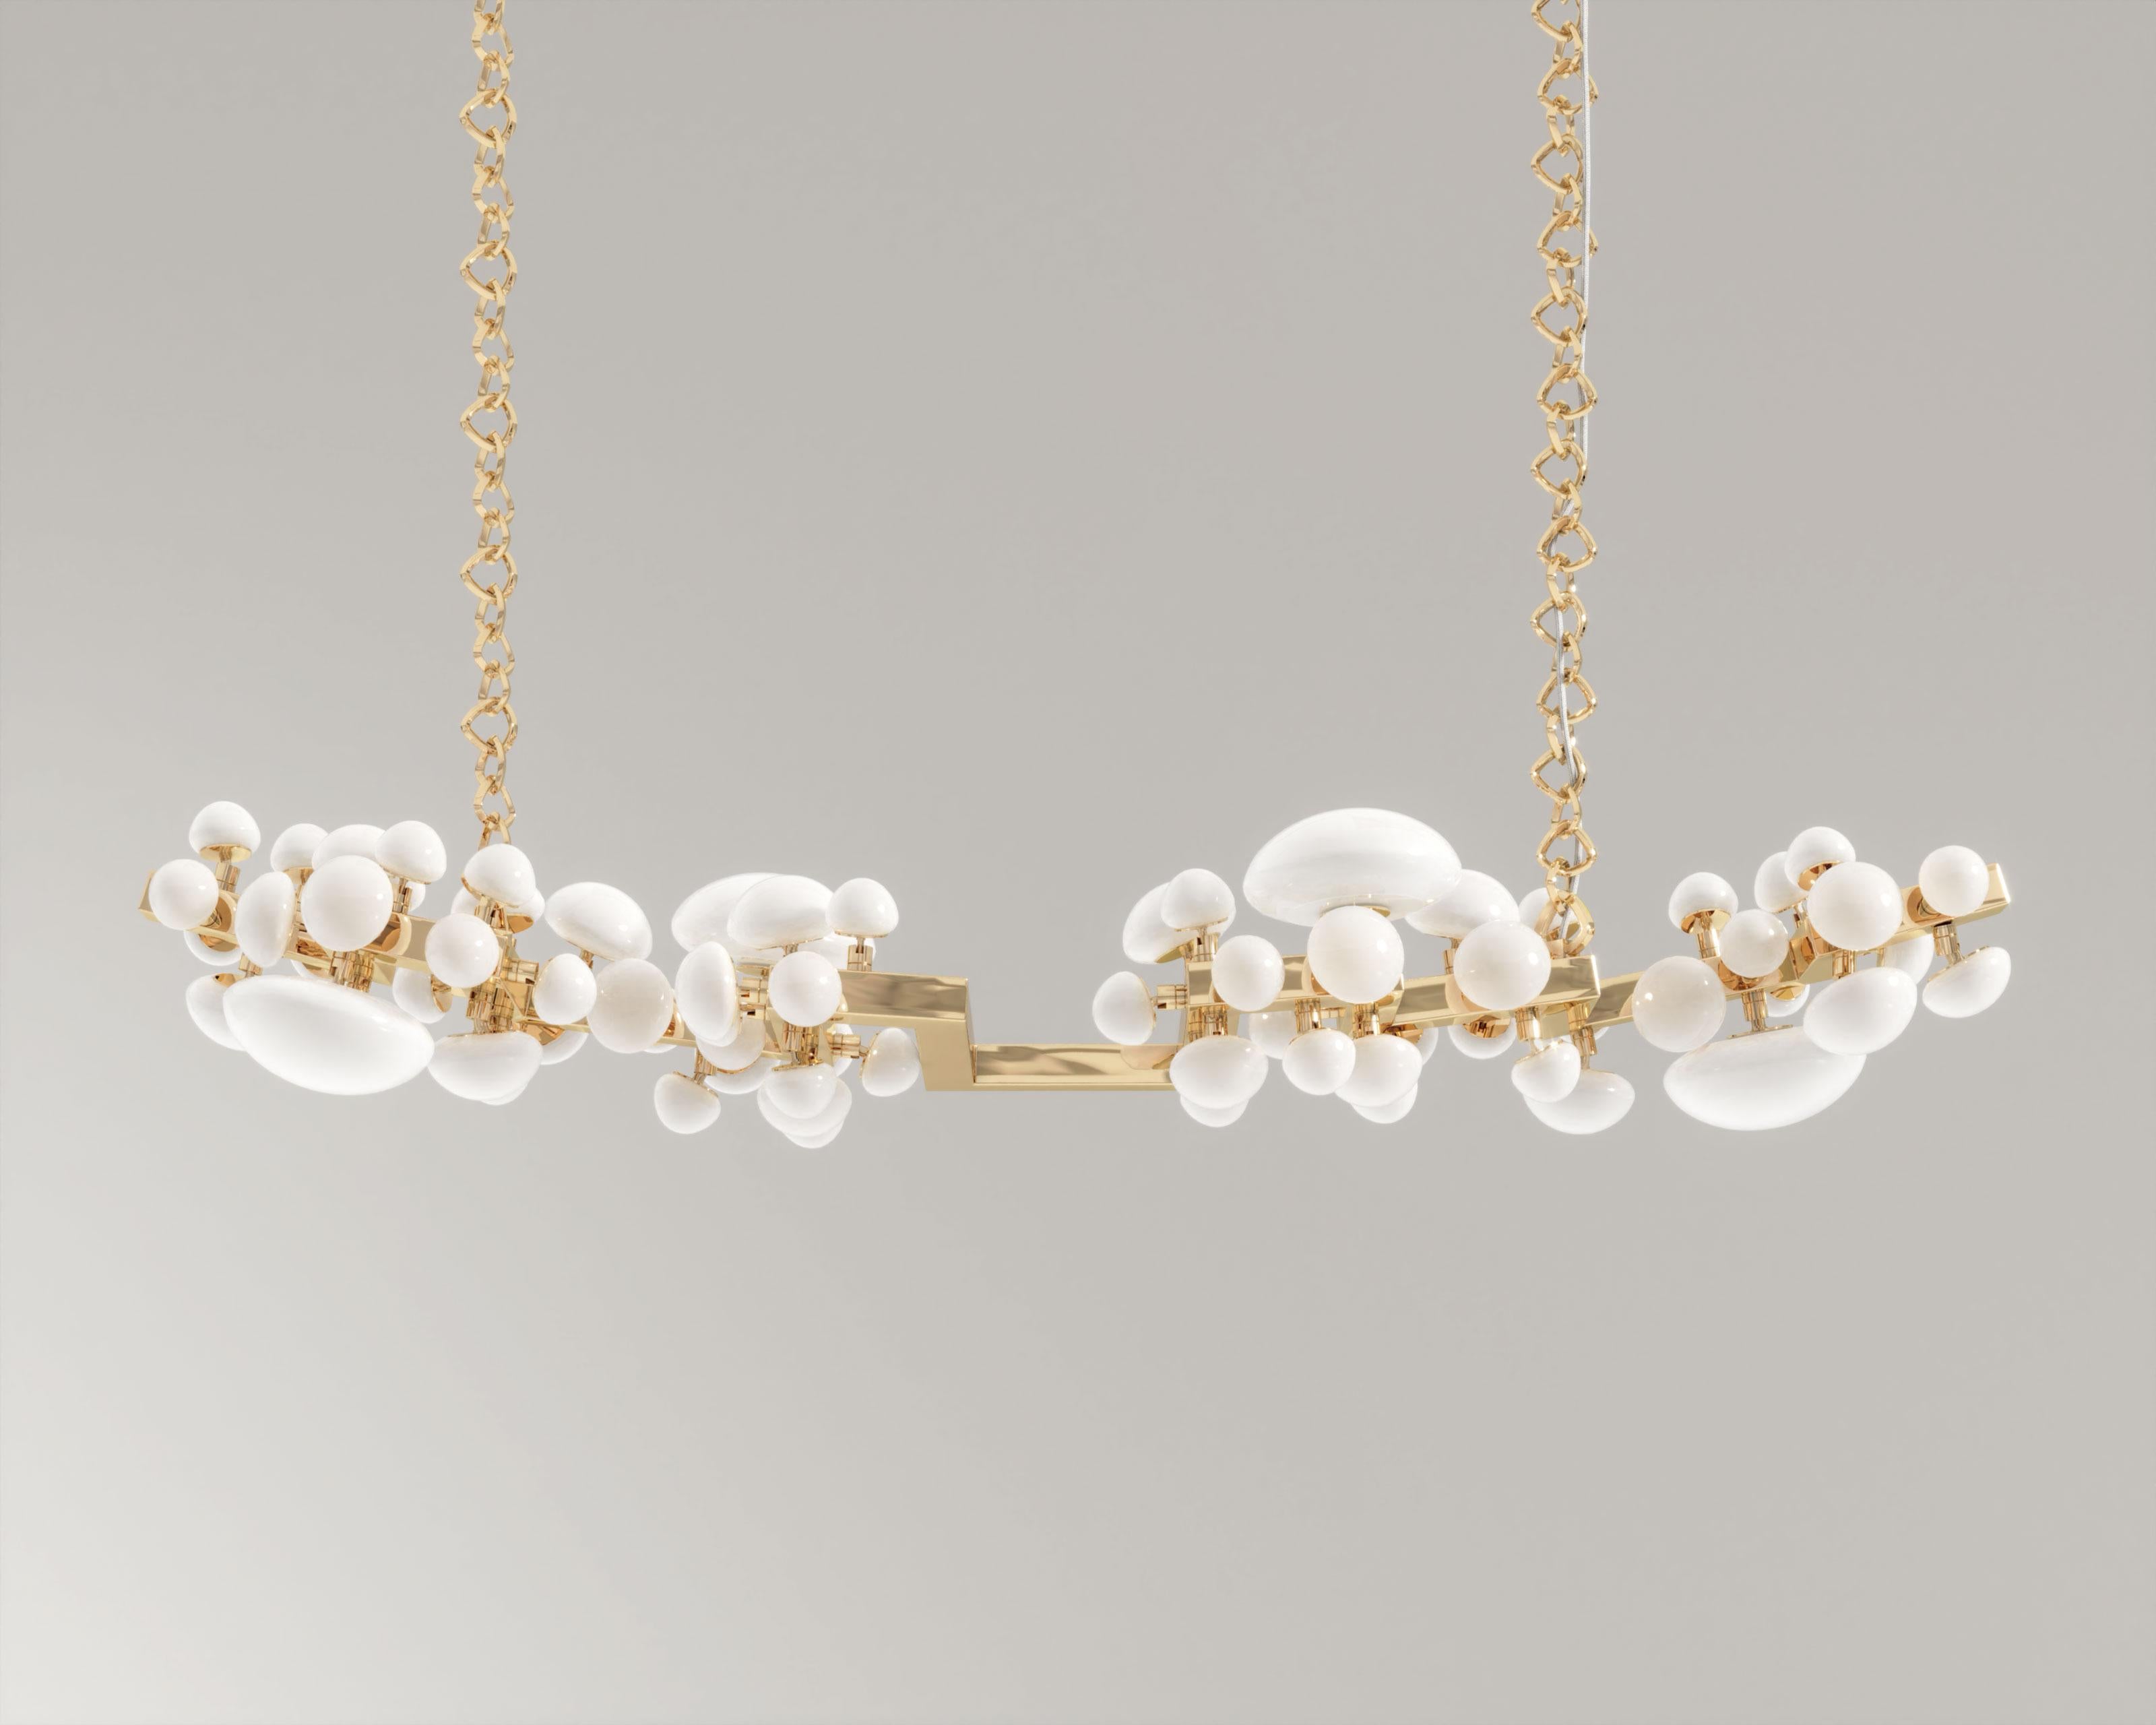 Intıma Horizontal Polished Bronze Chandelier
Intima Chancelier, where the elegance of the modern-day meets the wisdom of the one made to take you into nature’s embrace. This is no ordinary lamp. Select from three exquisite finishes: the classic look